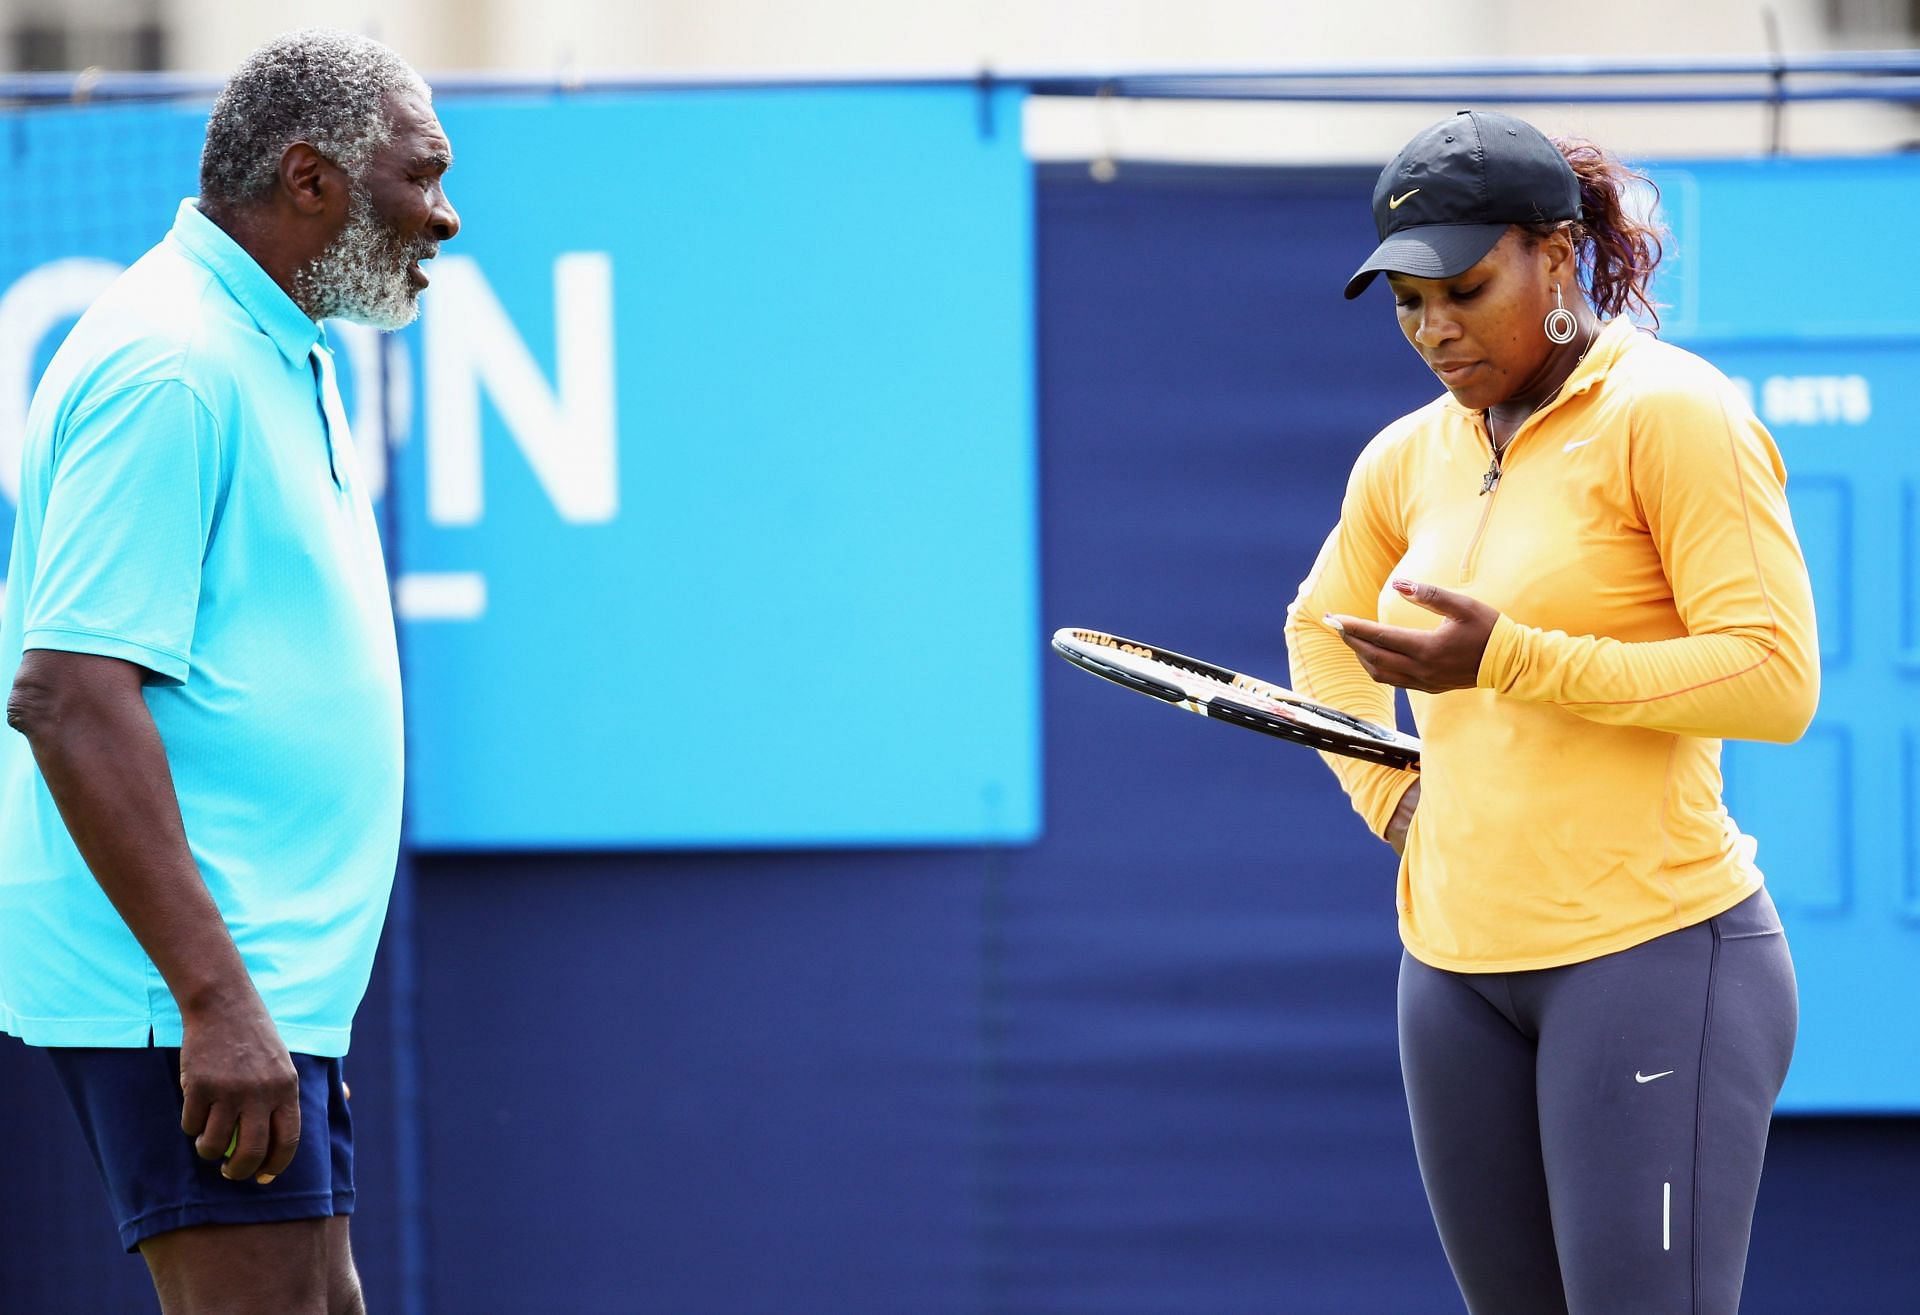 Serena Williams' dad 'King Richard' says he 'should have been dead by now'  in raw new trailer of upcoming documentary